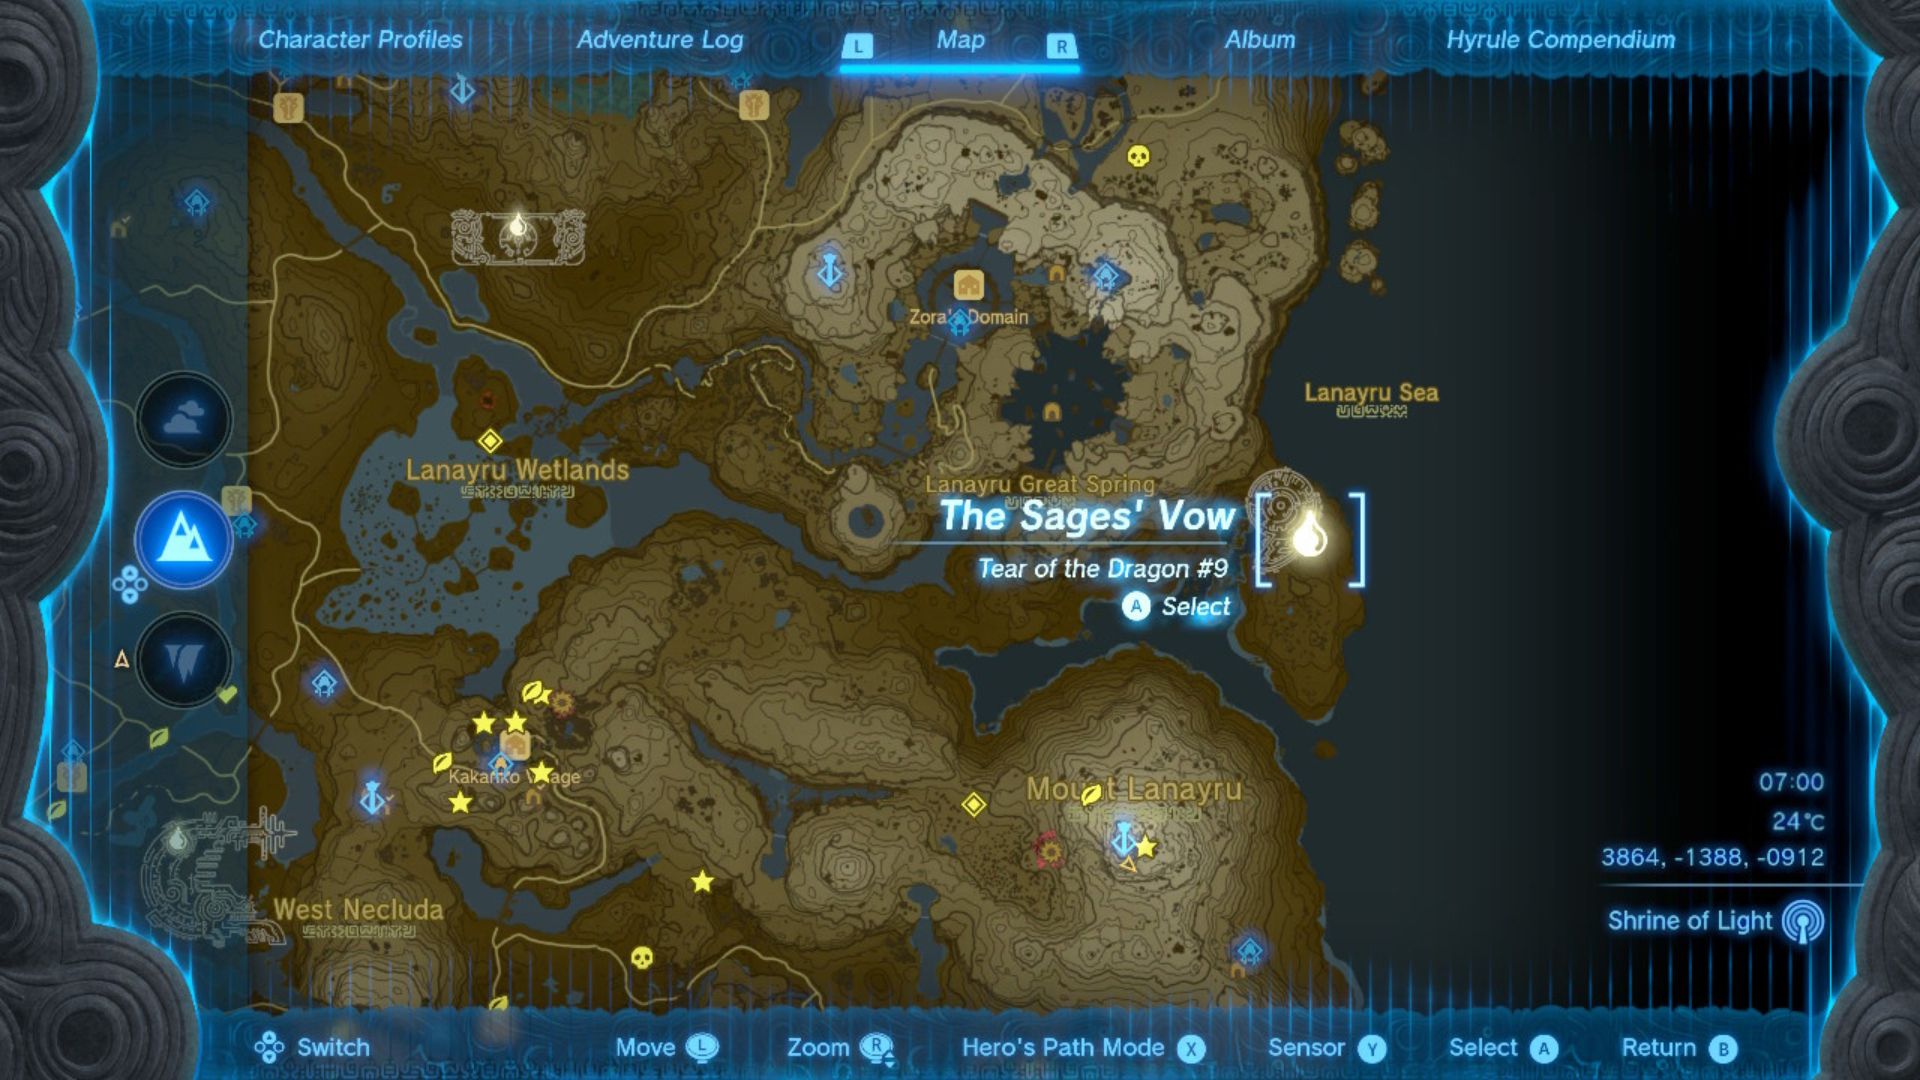 The Dragon's Tears (Geoglyph Locations) - The Legend of Zelda: Tears of the  Kingdom Guide - IGN